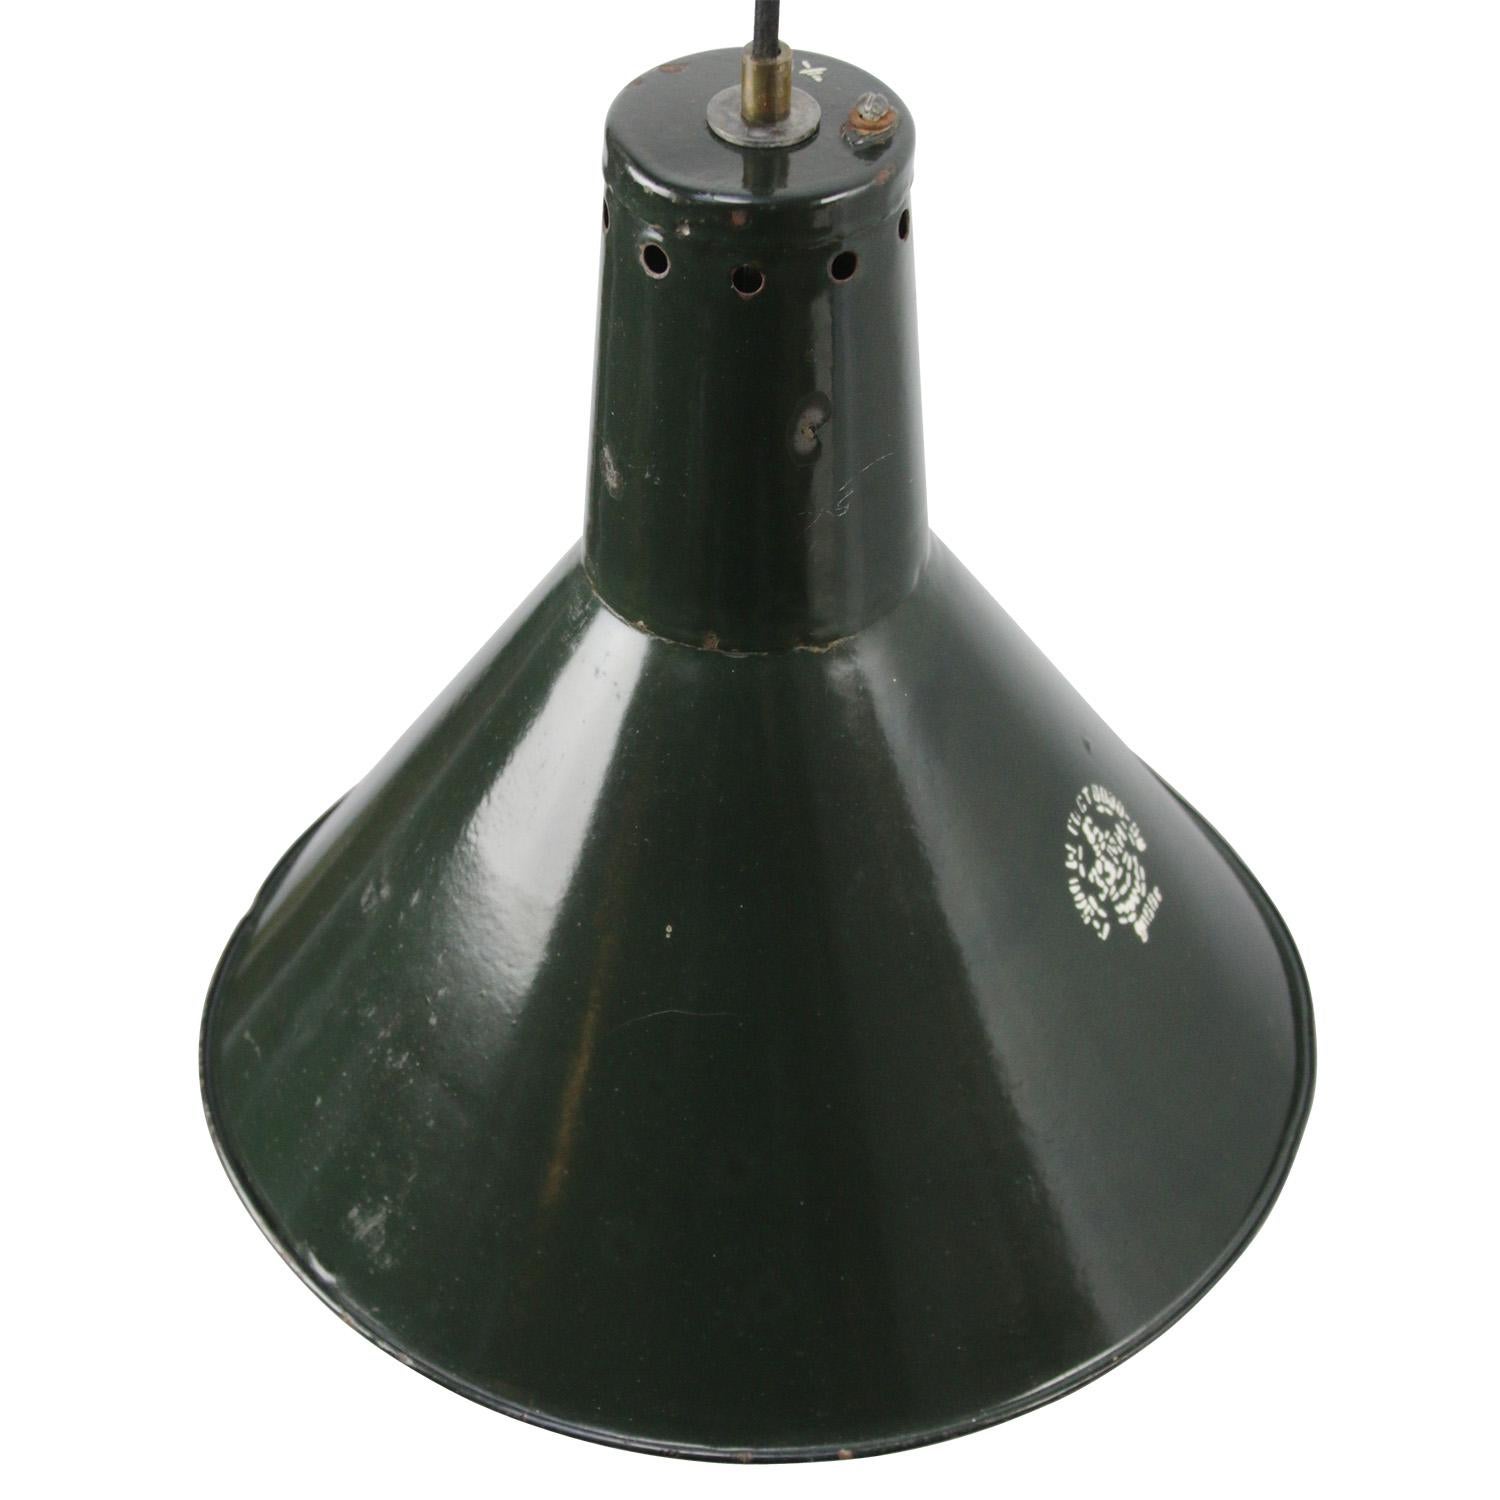 Dark green enamel factory pendant from the Ukraine.
White interior.

Weight: 2.0 kg / 4.4 lb

Priced per individual item. All lamps have been made suitable by international standards for incandescent light bulbs, energy-efficient and LED bulbs.